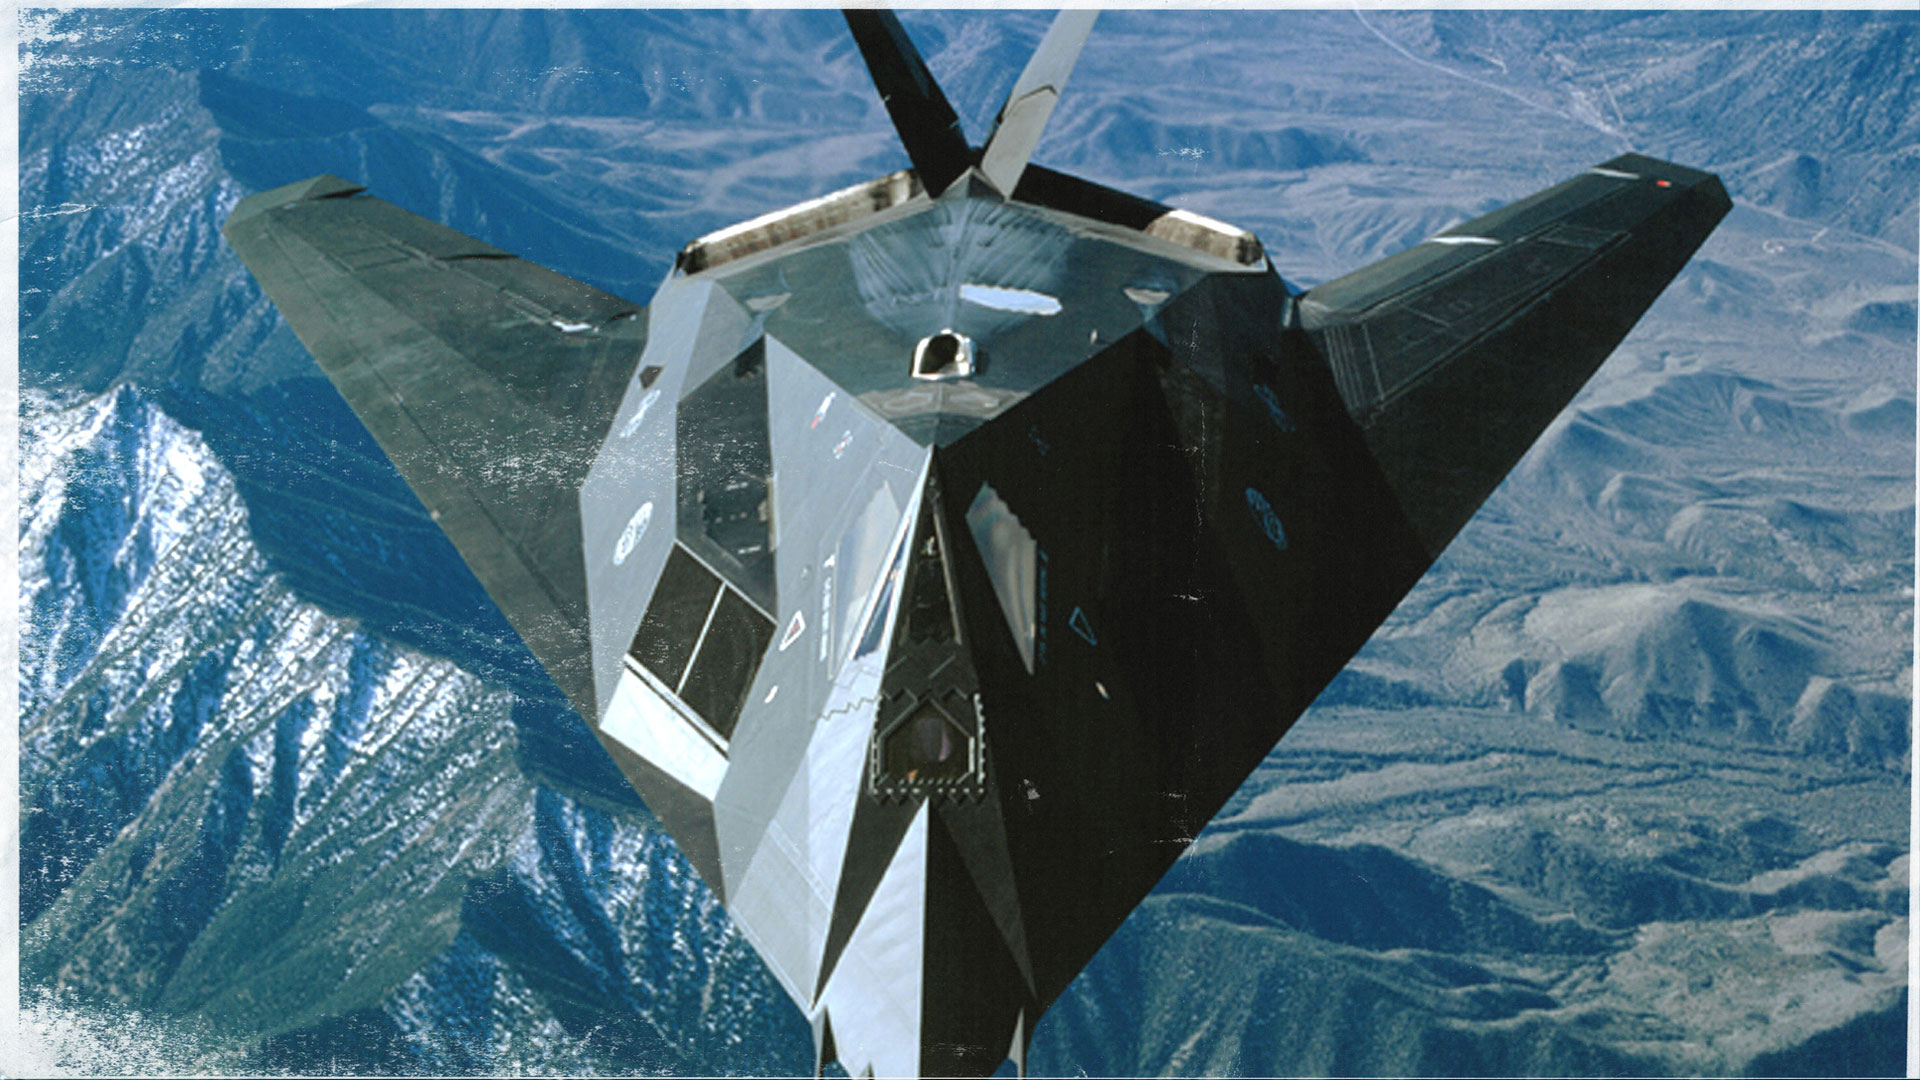 Close up of the stealth fighter flying over some mountains